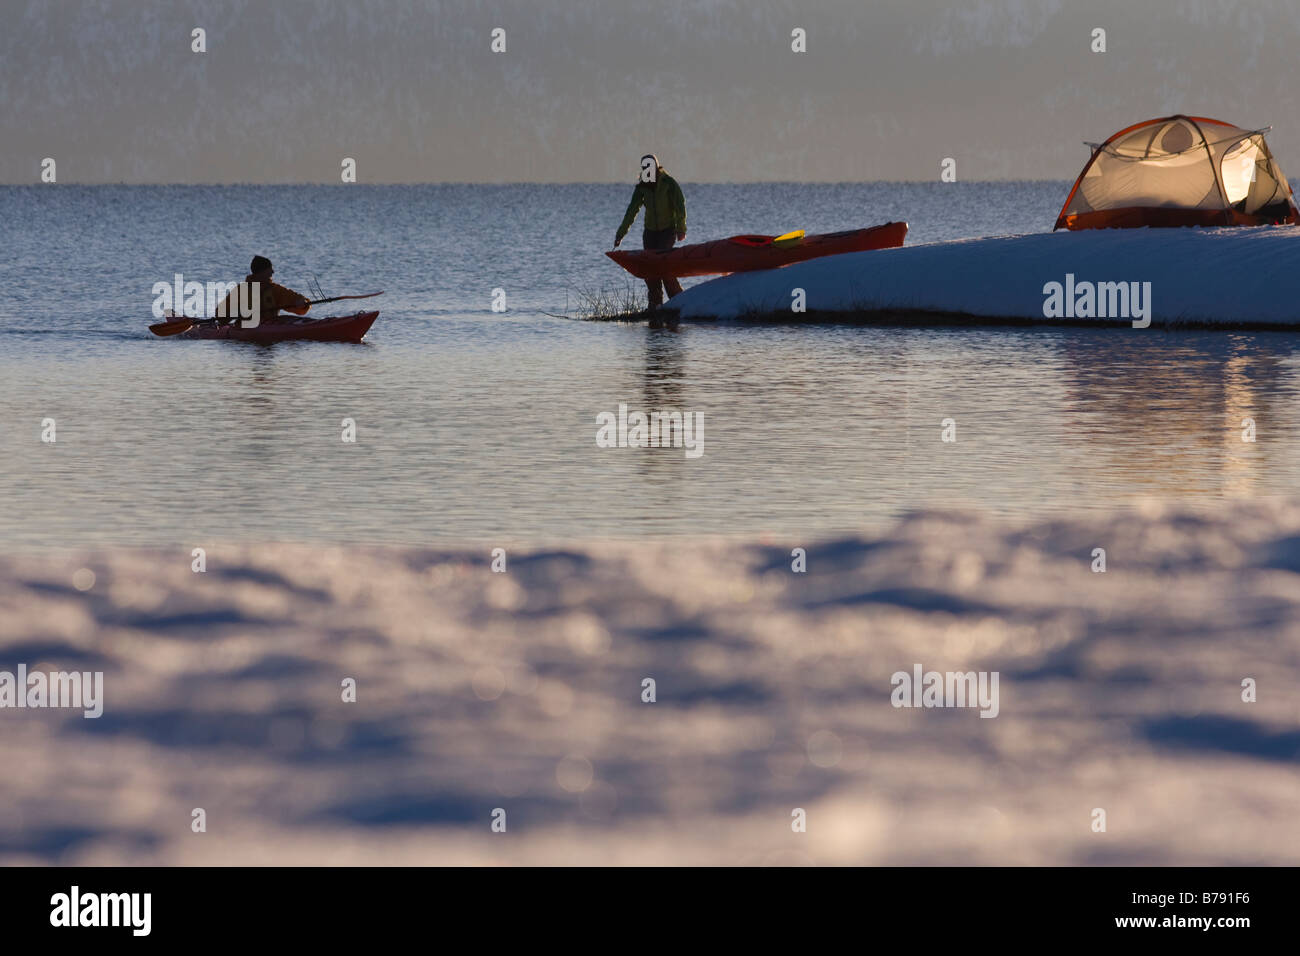 A man in a sea kayak paddling along the shore near a woman and a tent on Lake Tahoe in California on a snowy day at sunrise Stock Photo